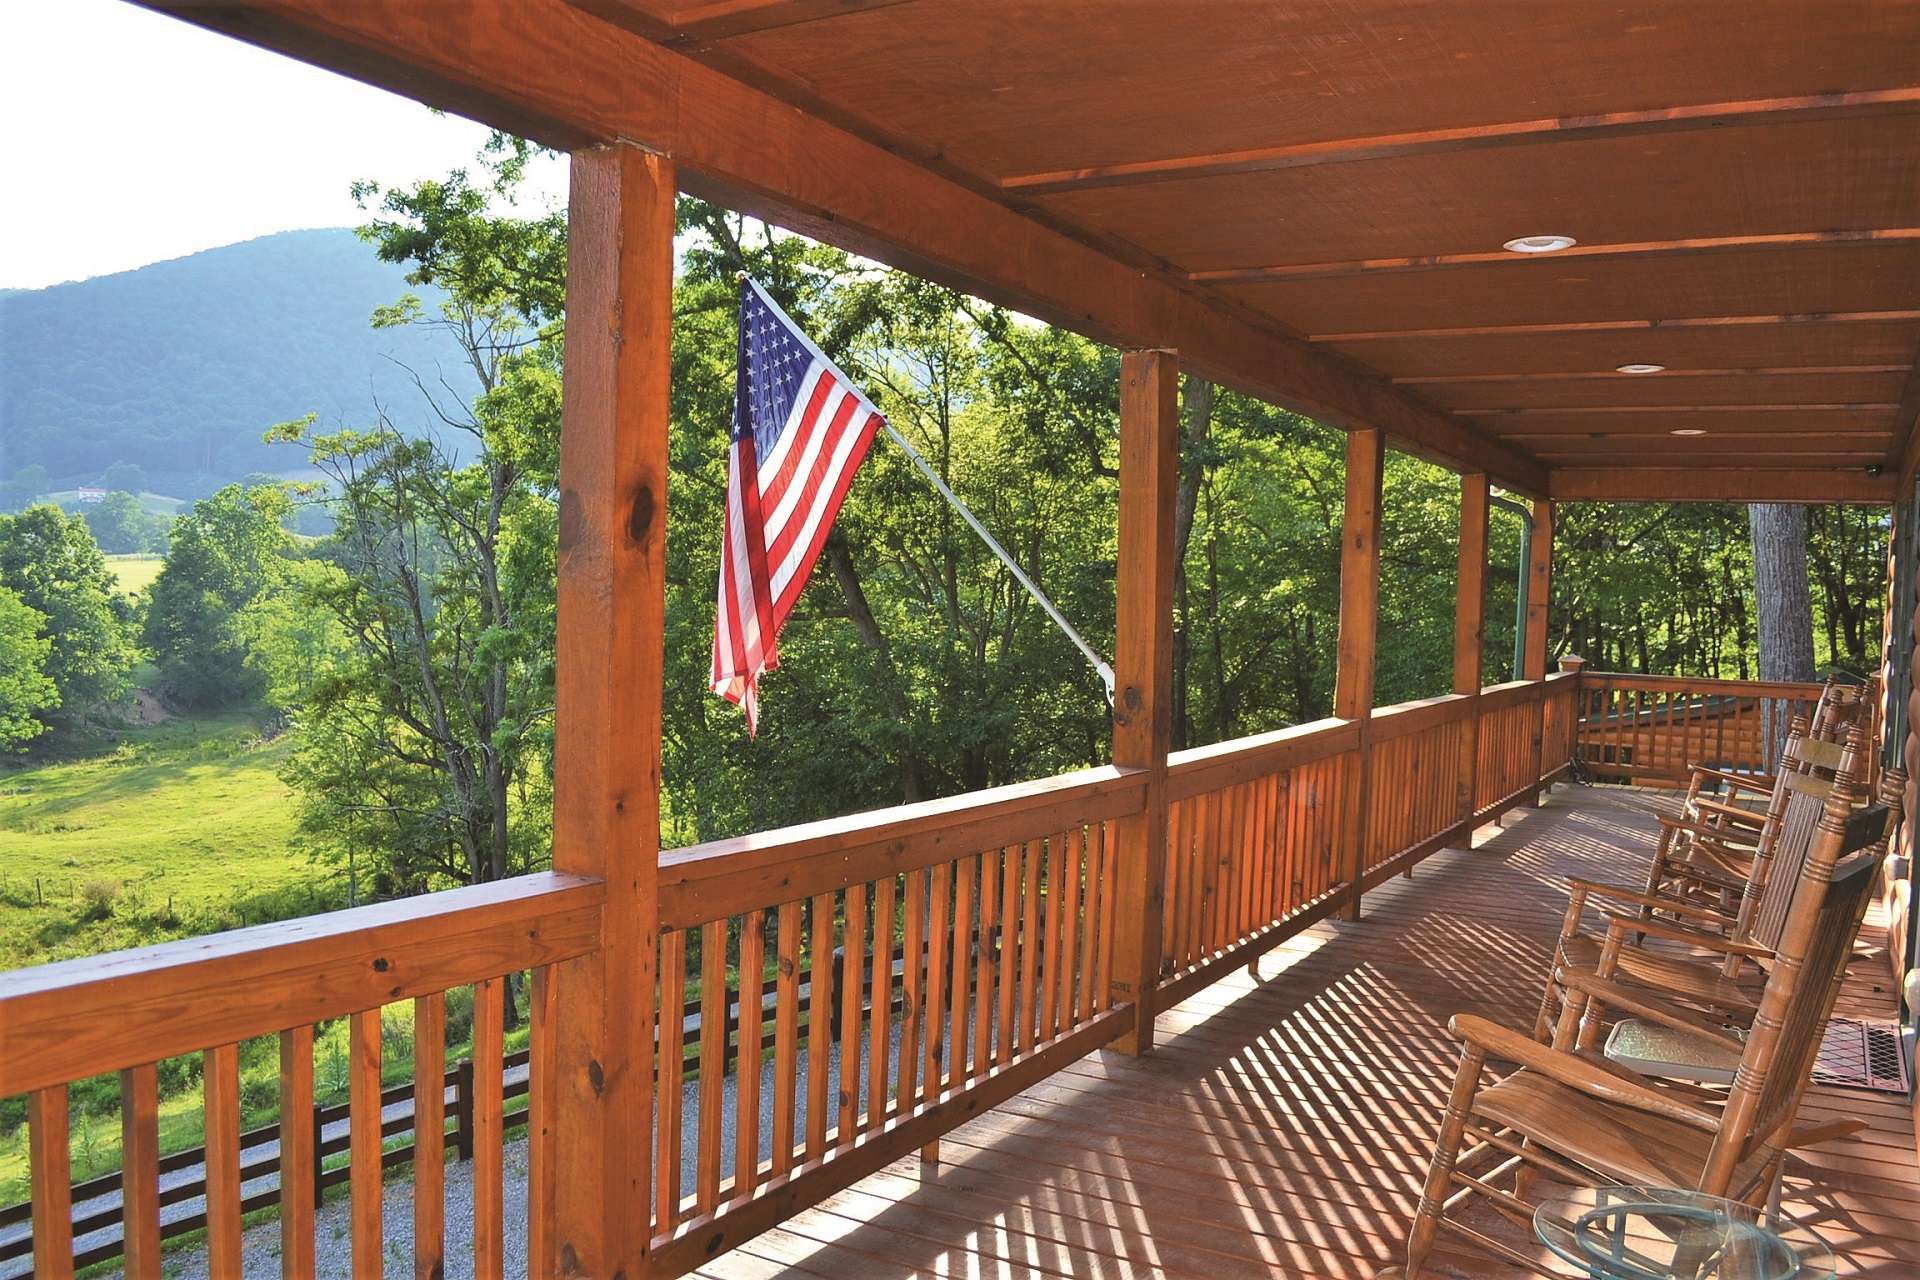 The full length covered front porch is the ideal location to enjoy a tall glass of iced tea while savoring the lush pastoral views with the Blue Ridge Mountains as a backdrop.